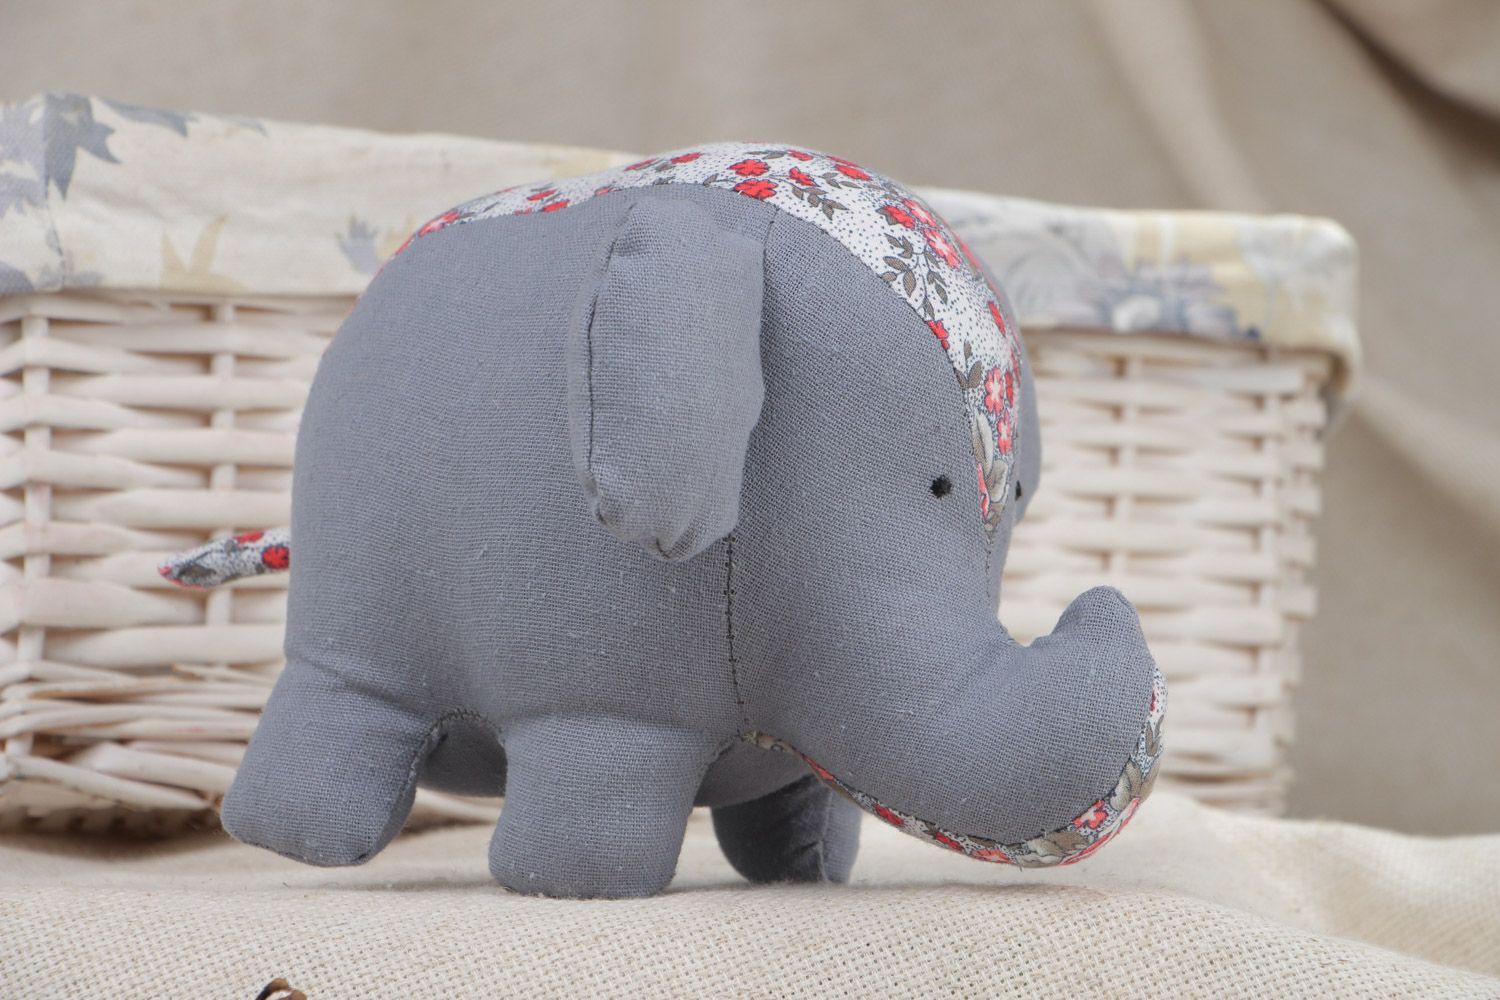 Handmade children's fabric soft toy elephant of gray color and average size photo 1